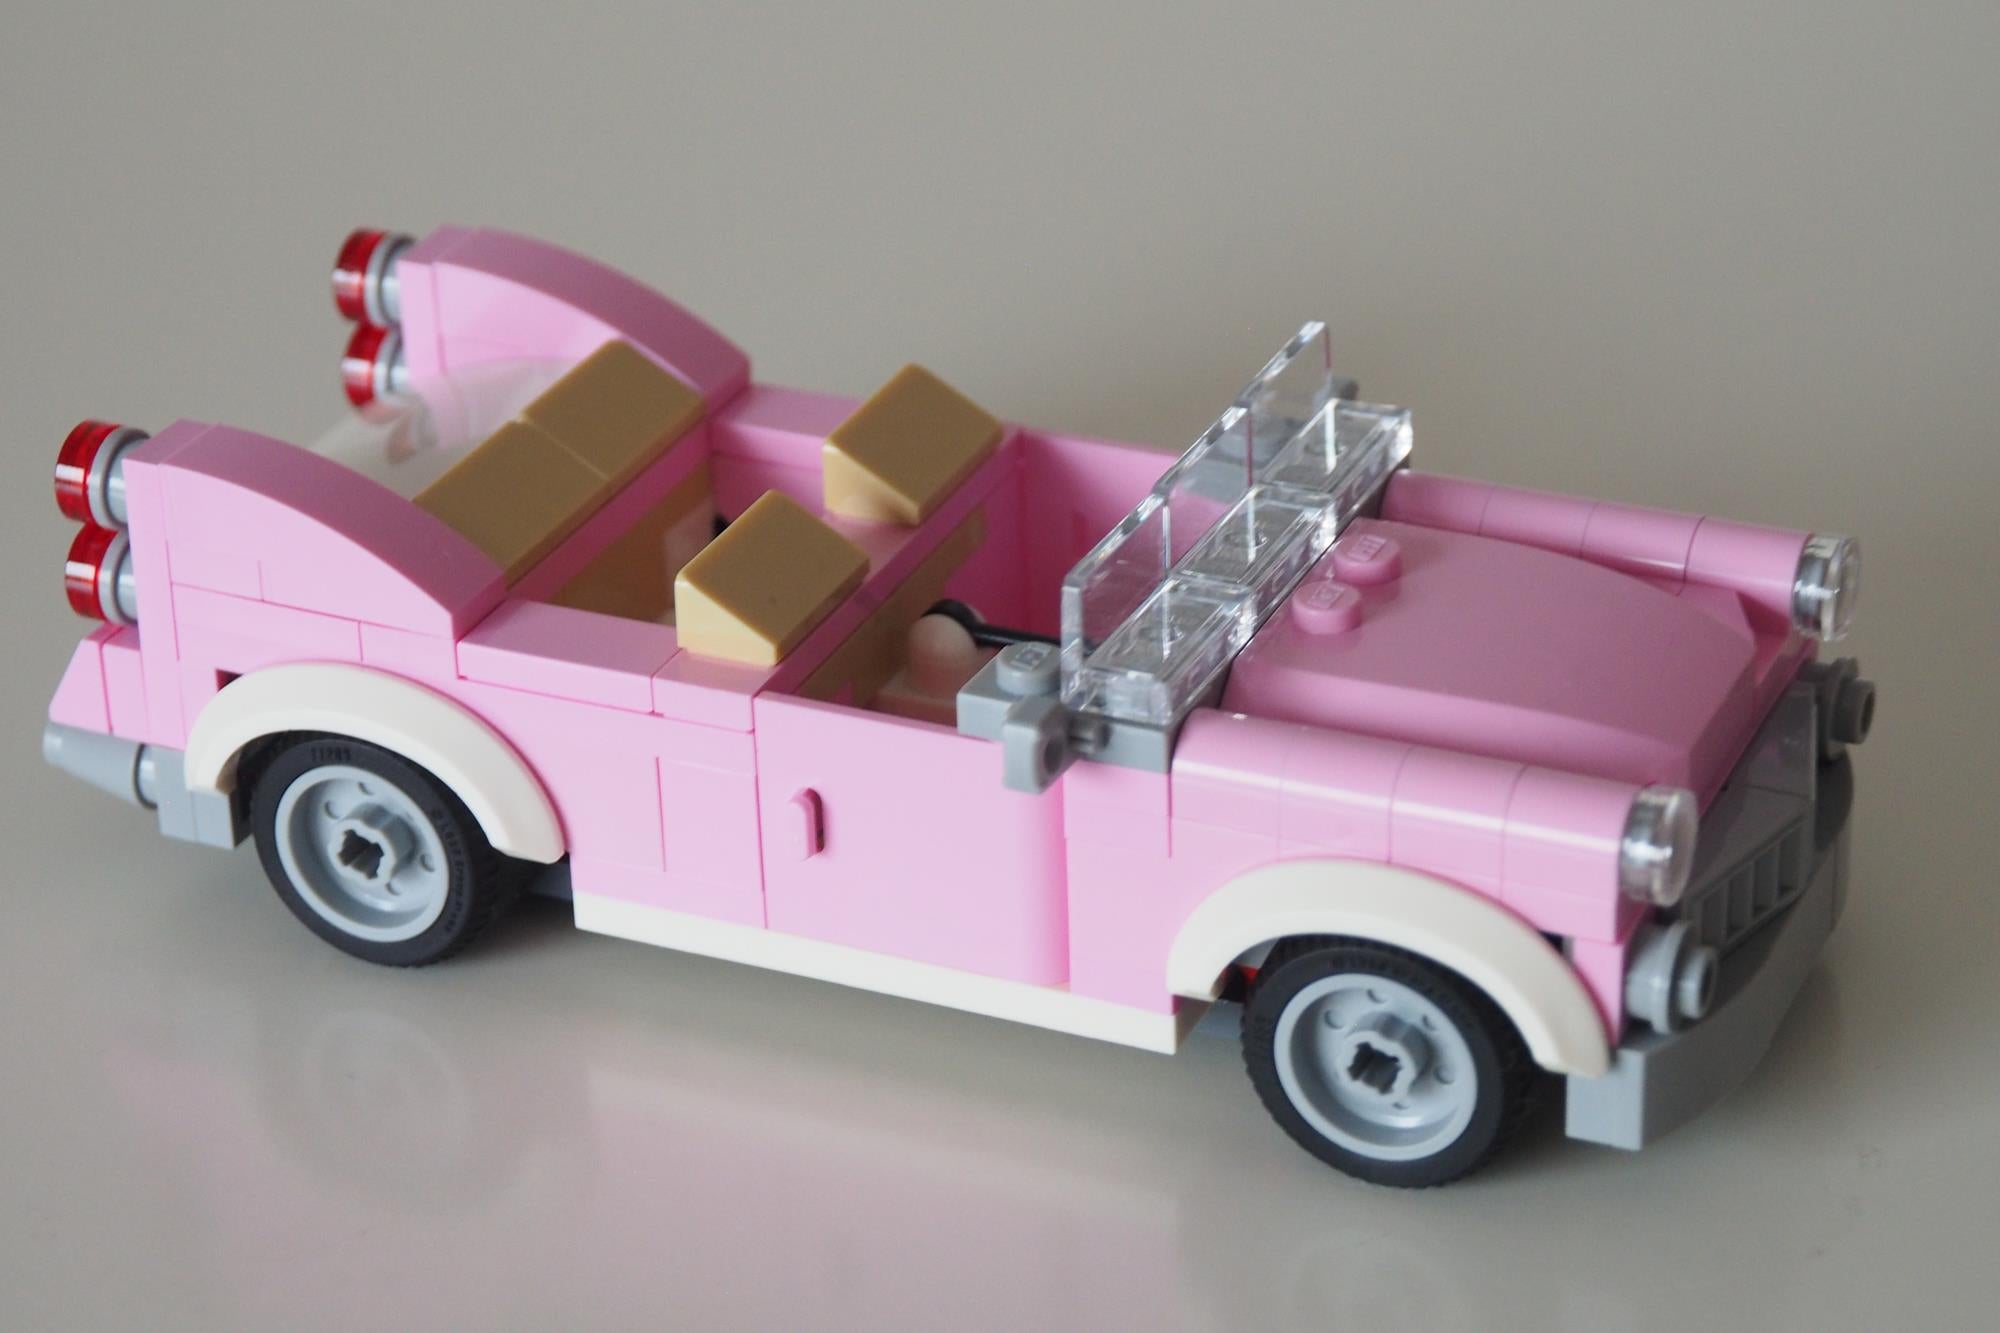 Pink LEGO vintage convertible car from a set.